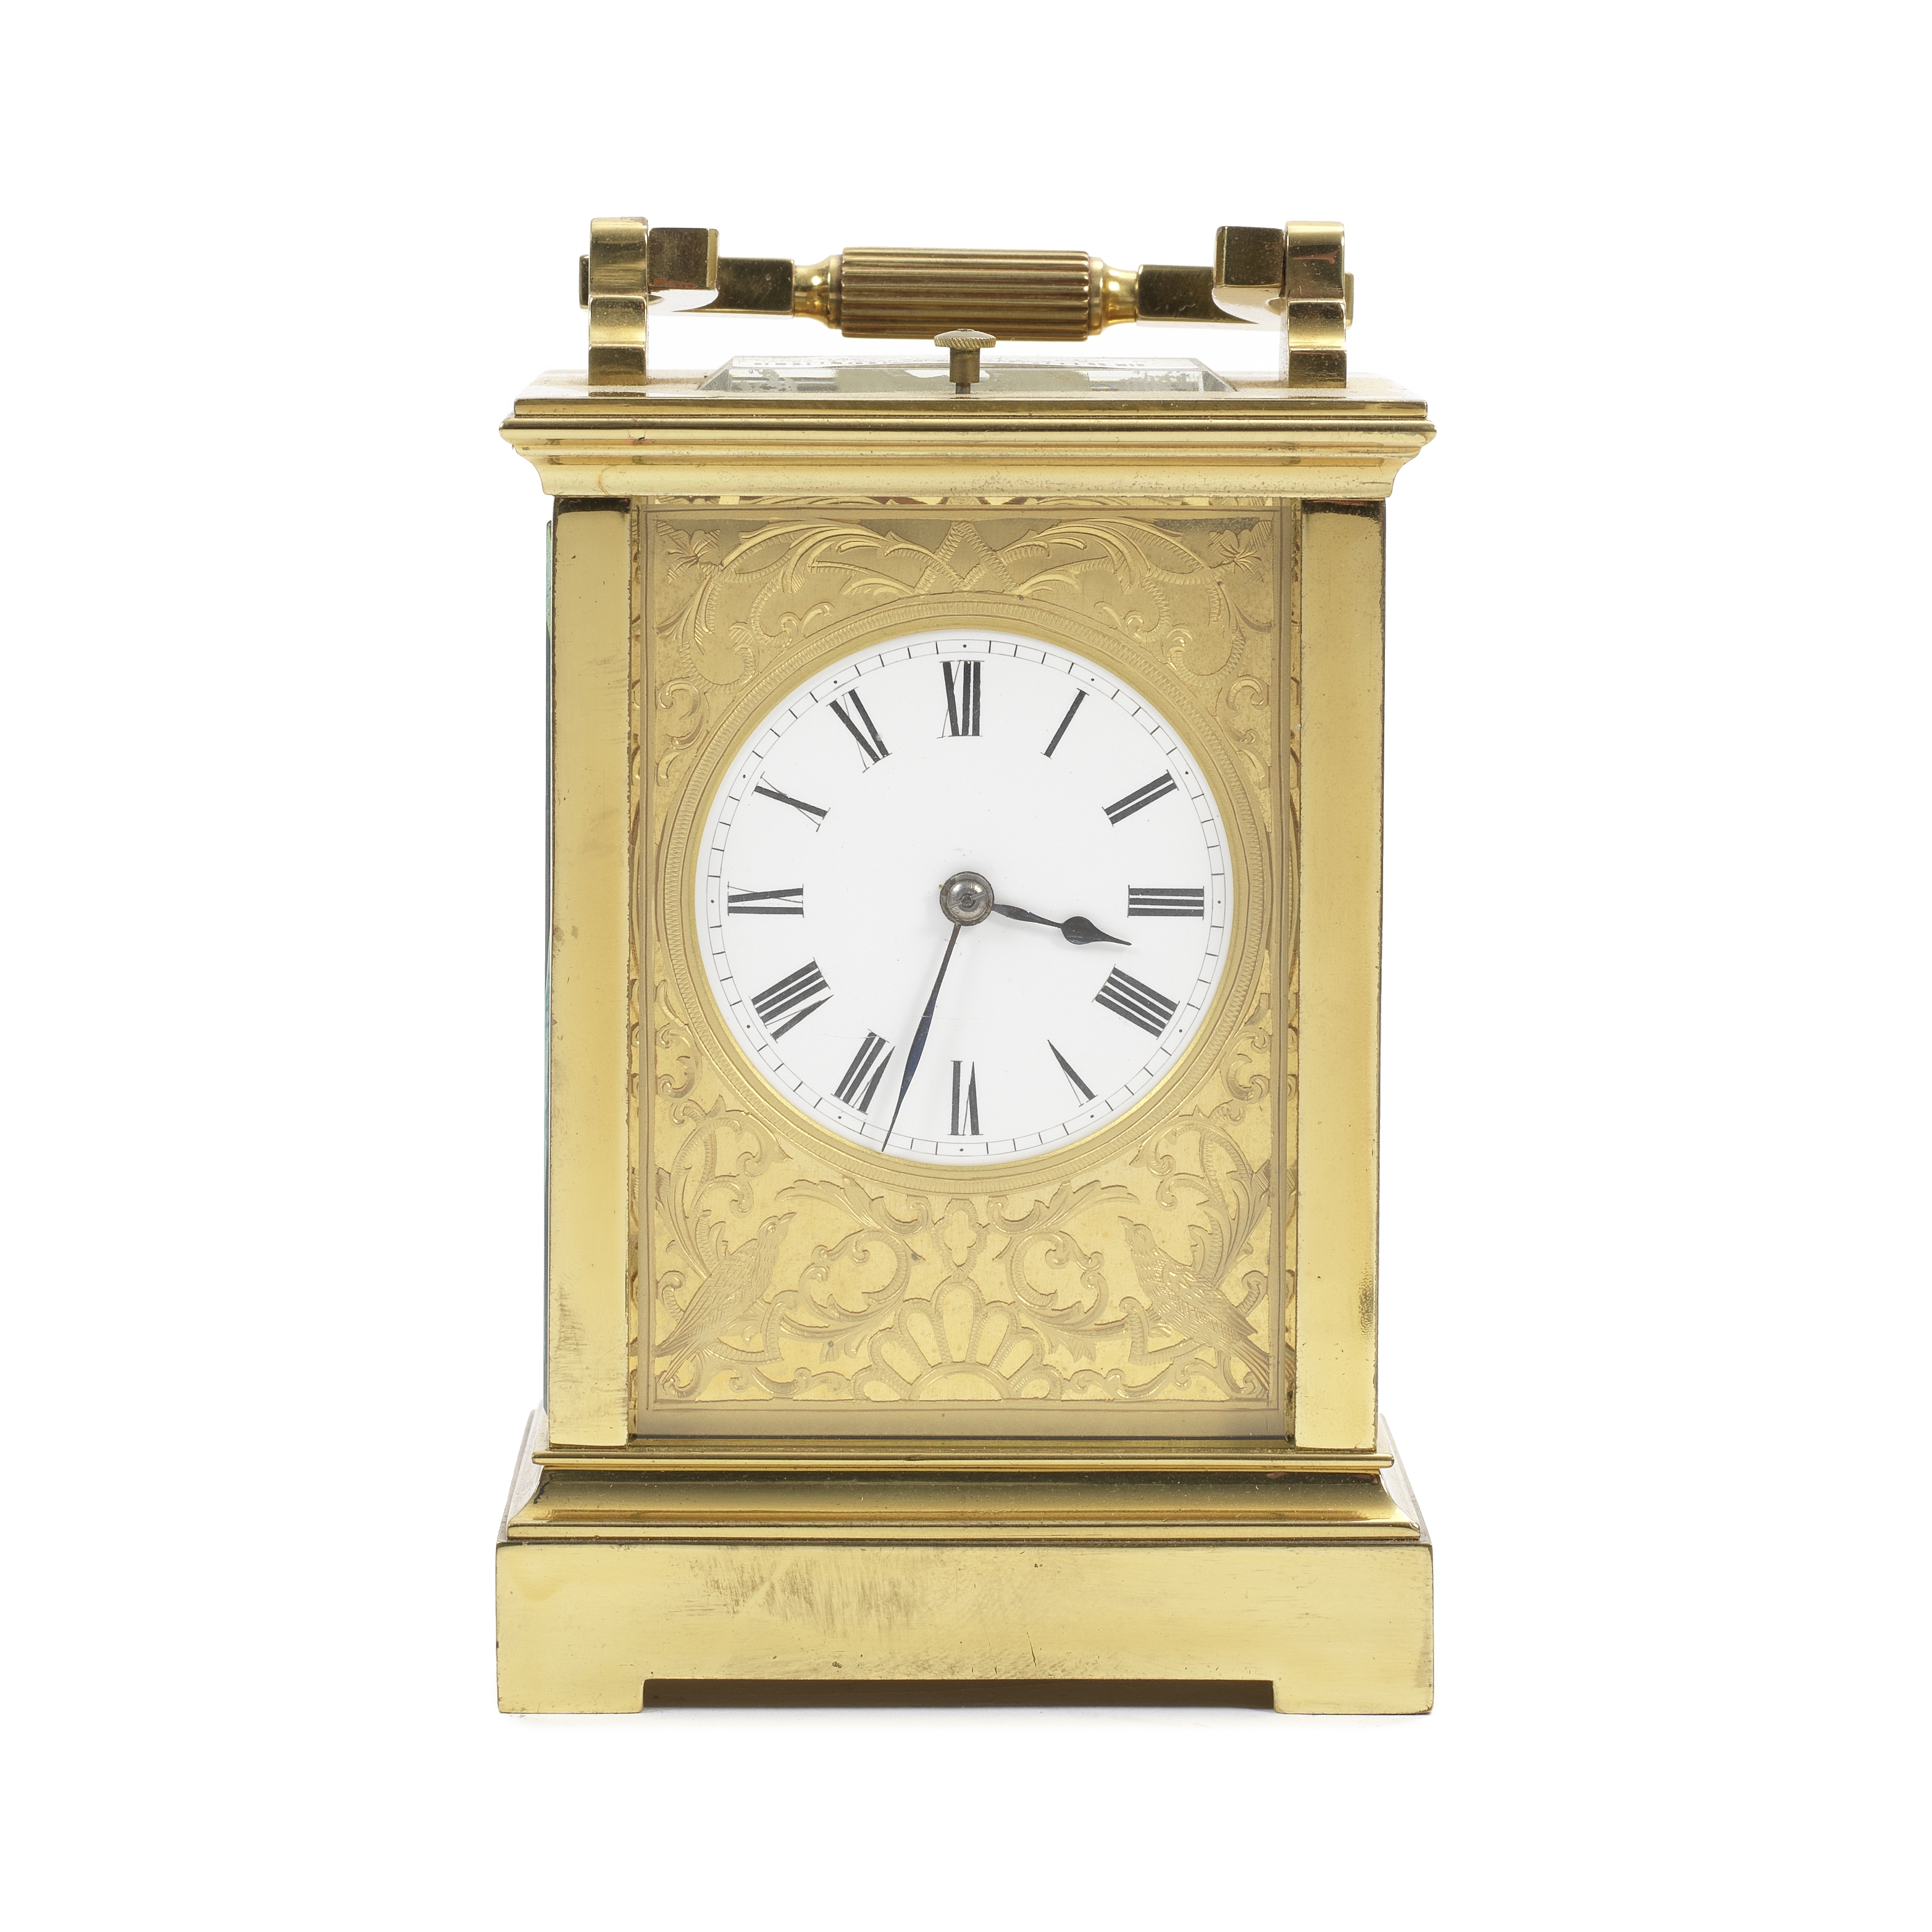 A late 19th/early 20th century French brass carriage clock with repeat